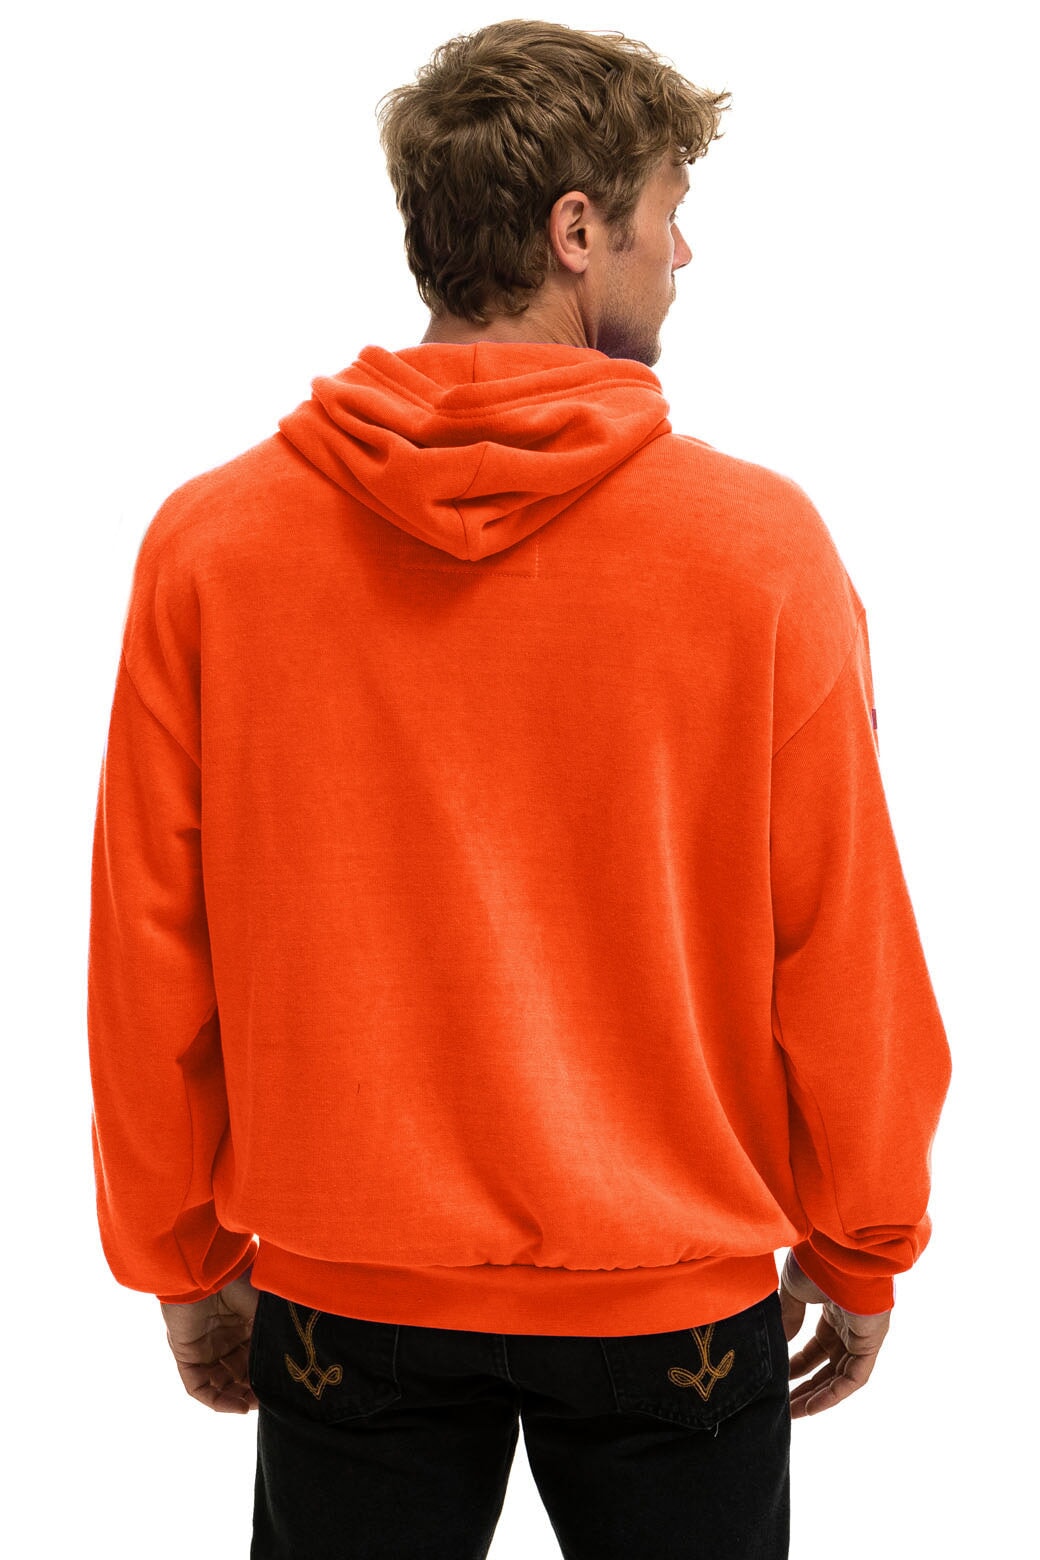 AVIATOR NATION MILL VALLEY RELAXED PULLOVER HOODIE - ORANGE Hoodie Aviator Nation 